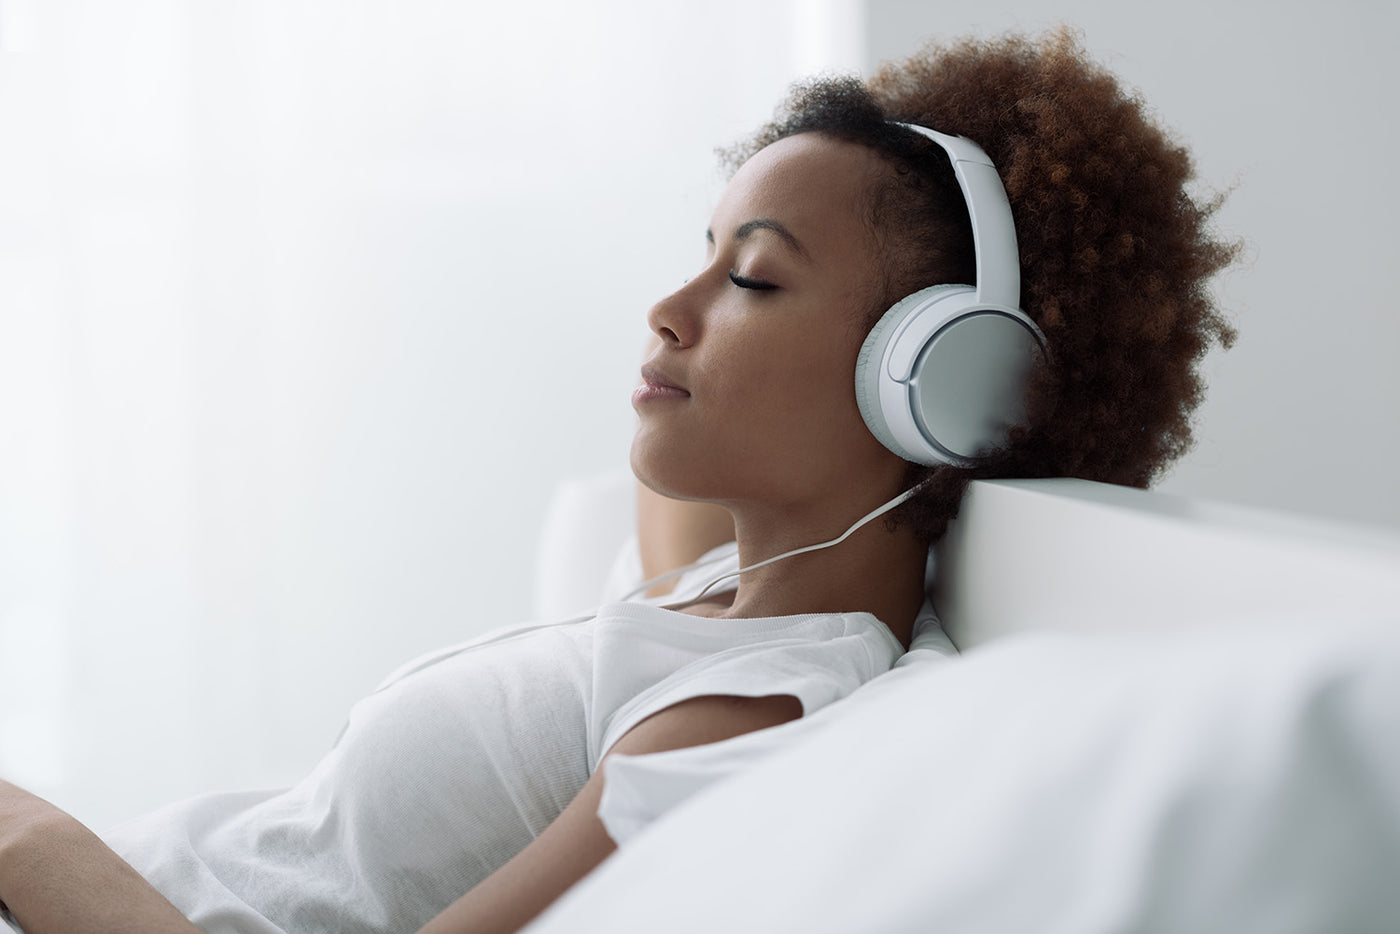 Science Podcasts To Fall Asleep To